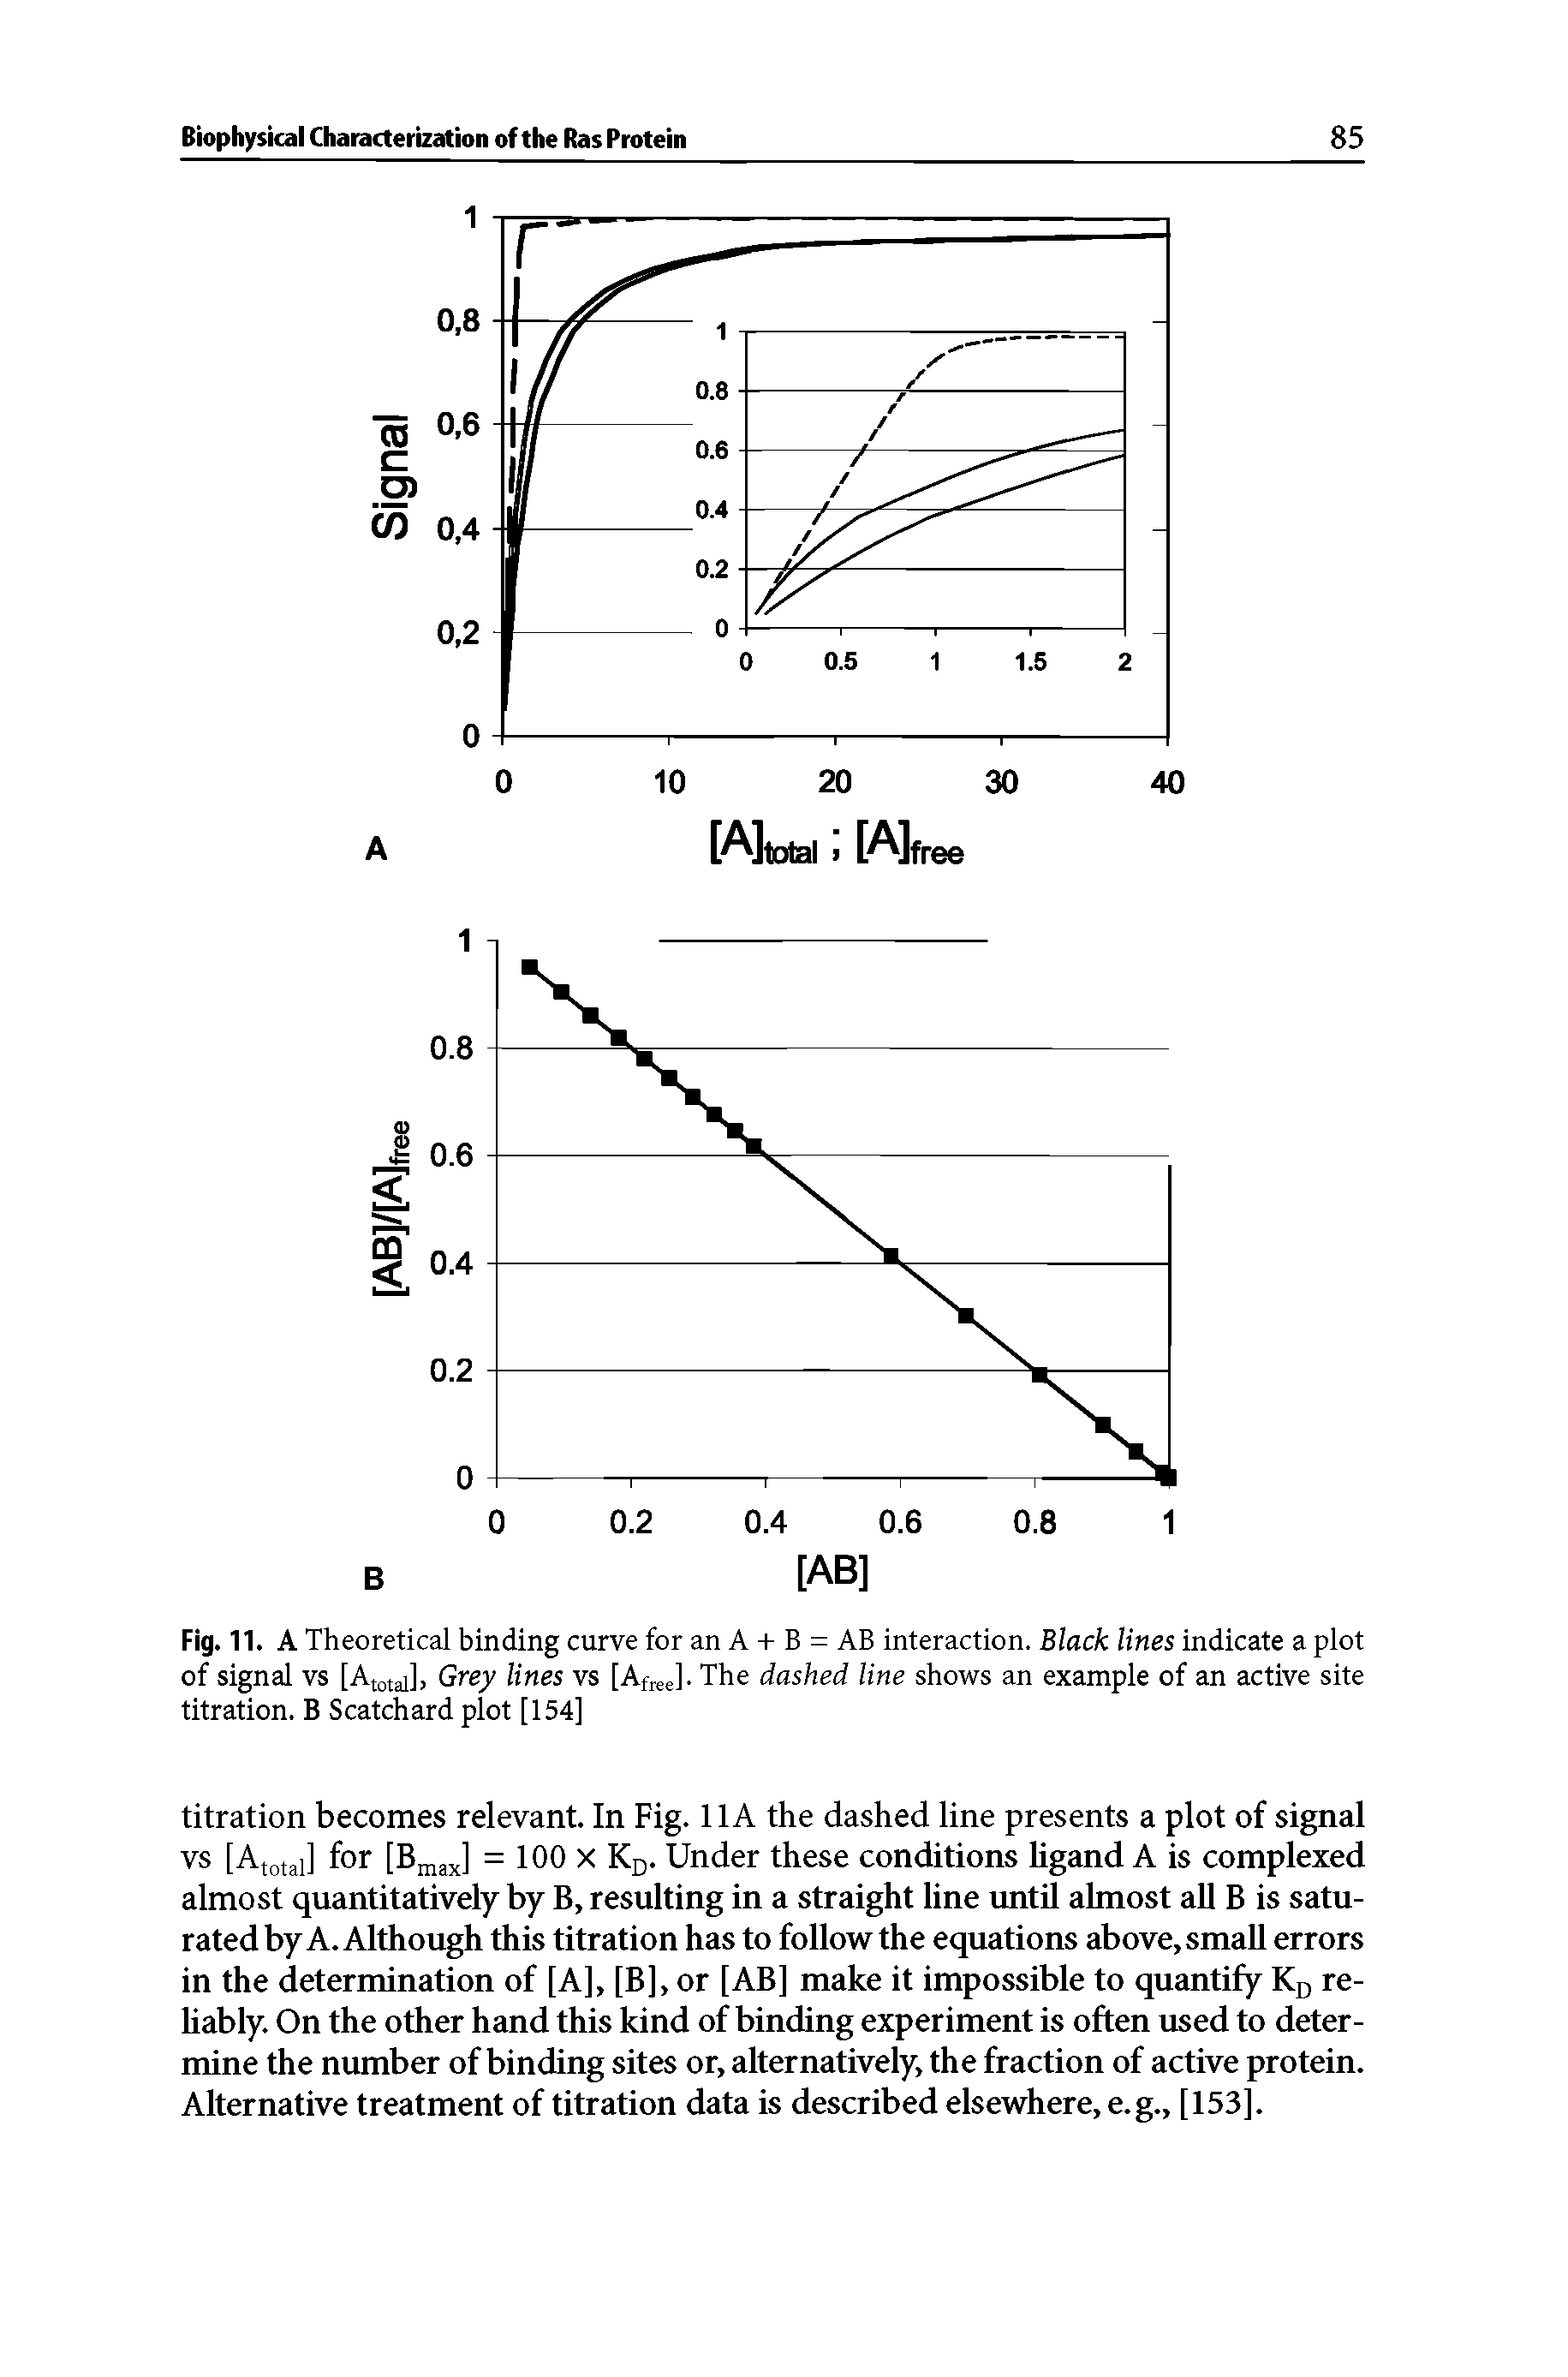 Fig. 11. A Theoretical binding curve for an A + B = AB interaction. Black lines indicate a plot of signal vs [Atotal], Grey lines vs [Afree]. The dashed line shows an example of an active site titration. B Scatchard plot [154]...